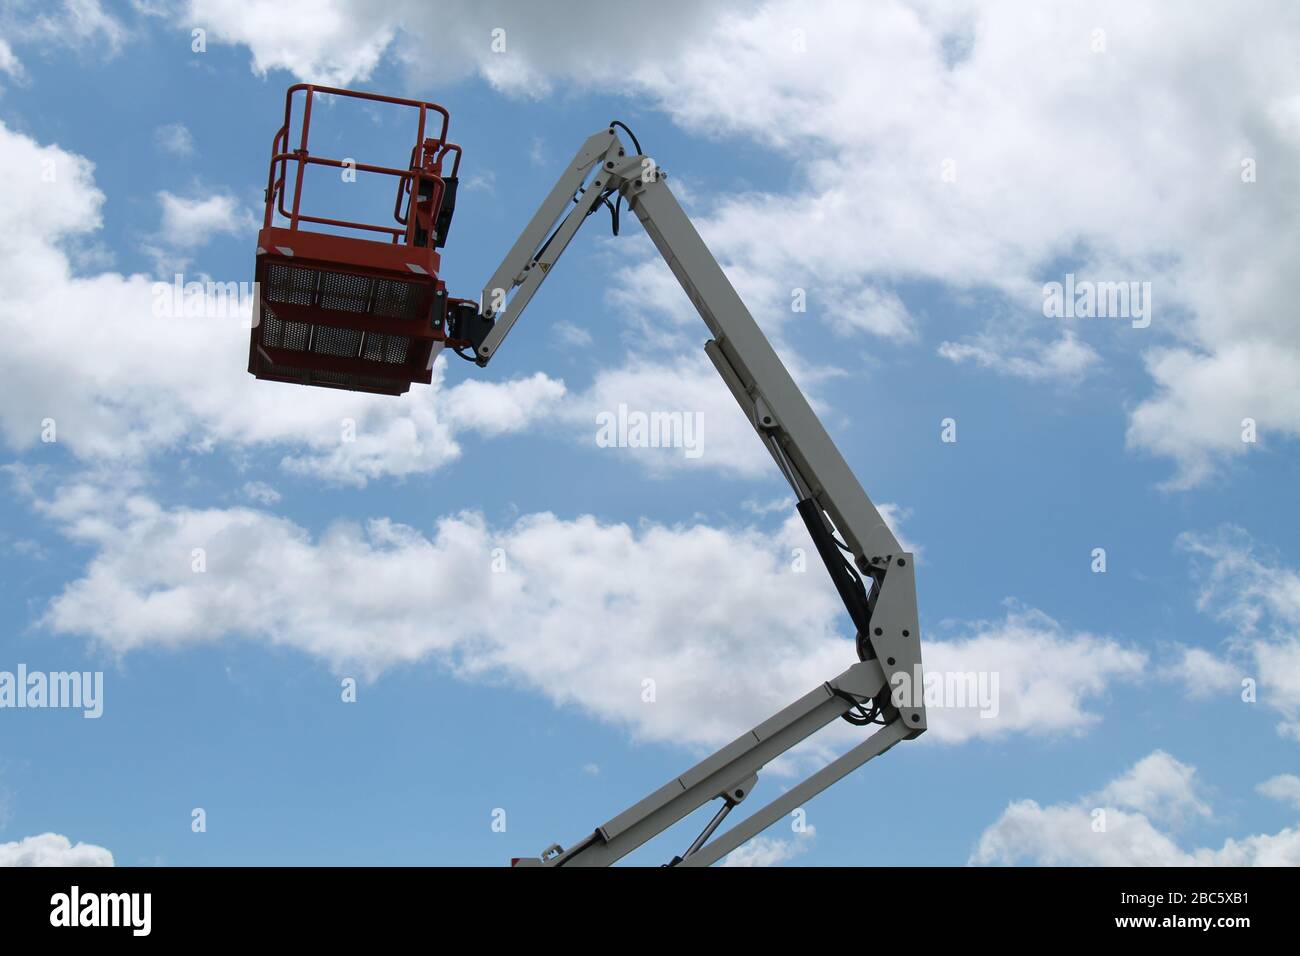 The Cage and Long Arm of a Cherry Picker Lift. Stock Photo